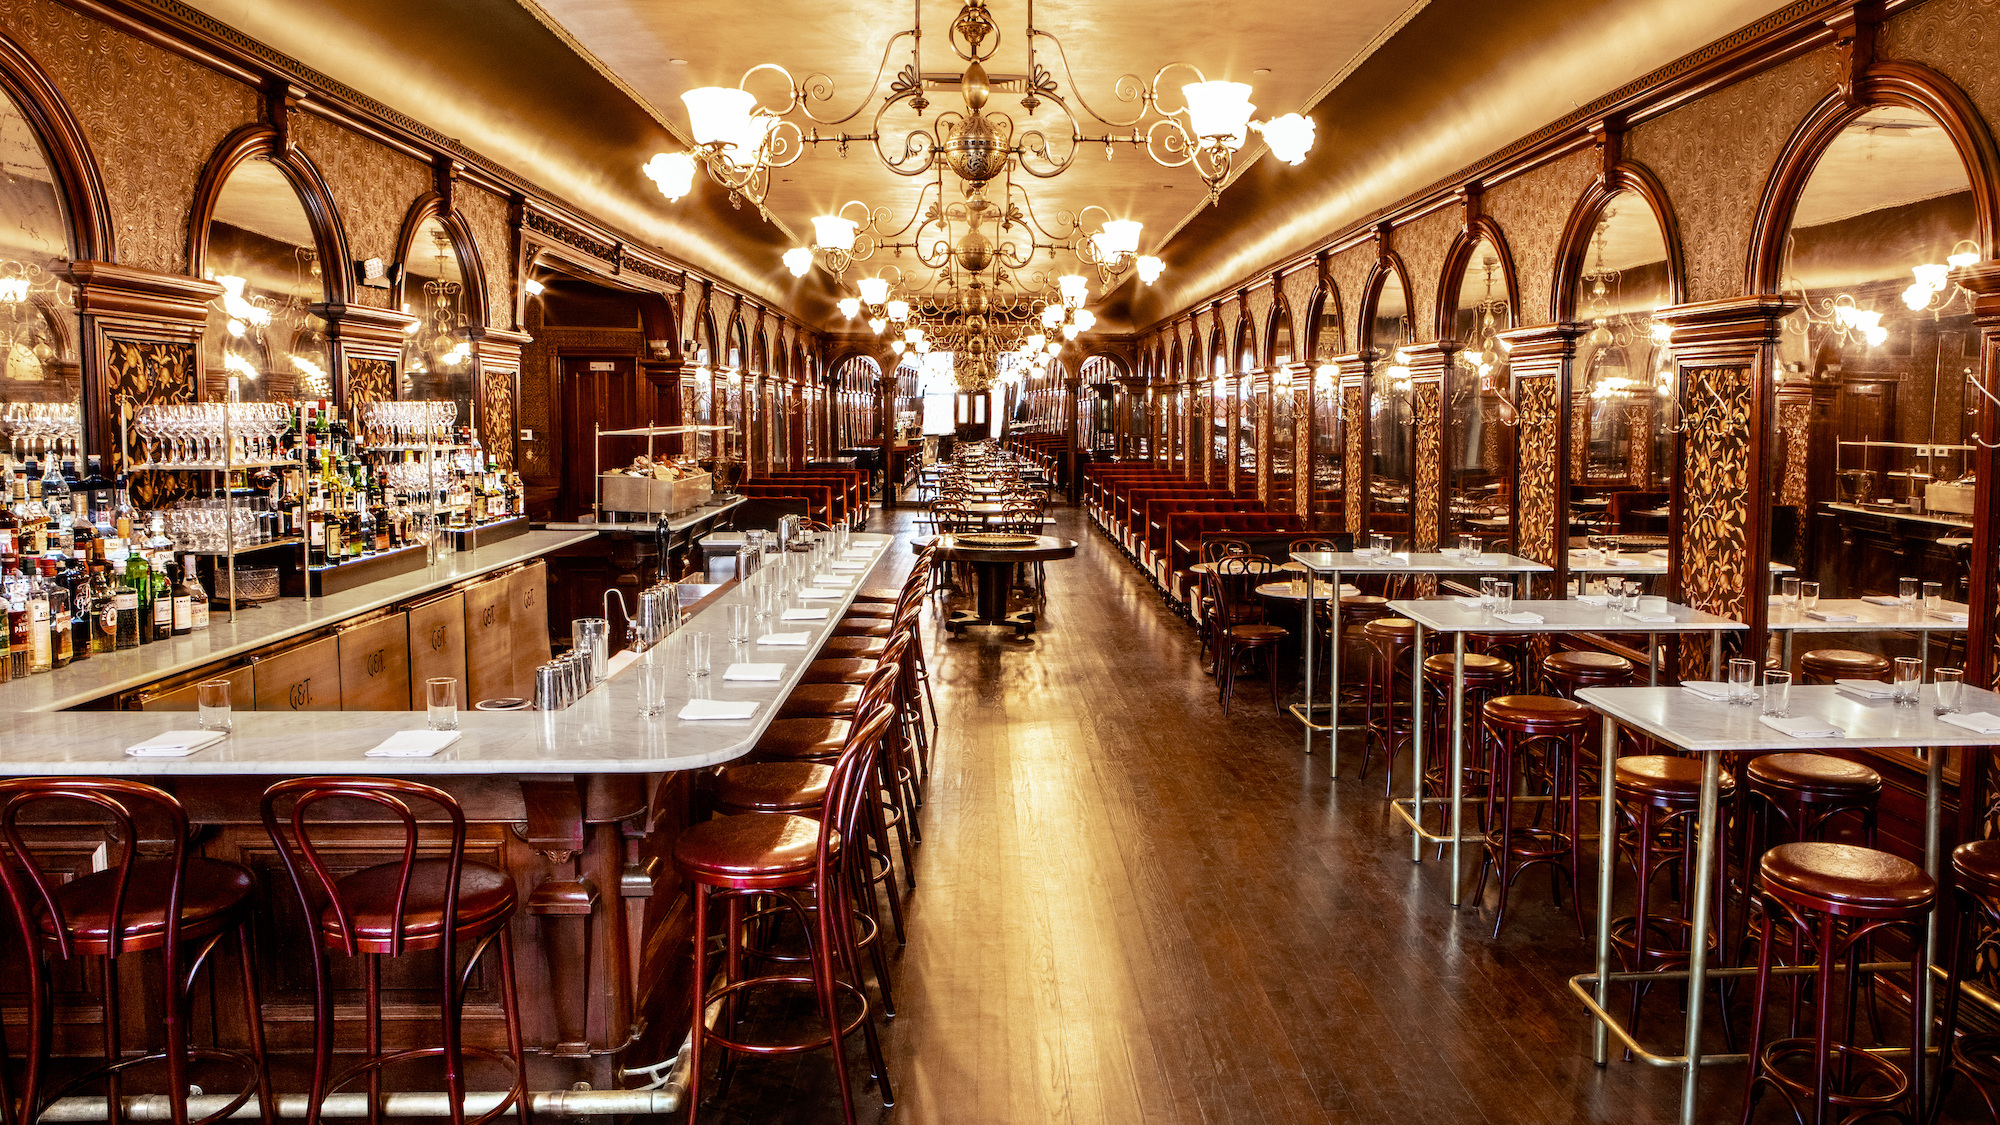 The current-day Gage & Tollner dining room. // Photo courtesy of Gage & Tollner; historical photos courtesy of the Brooklyn Historical Society